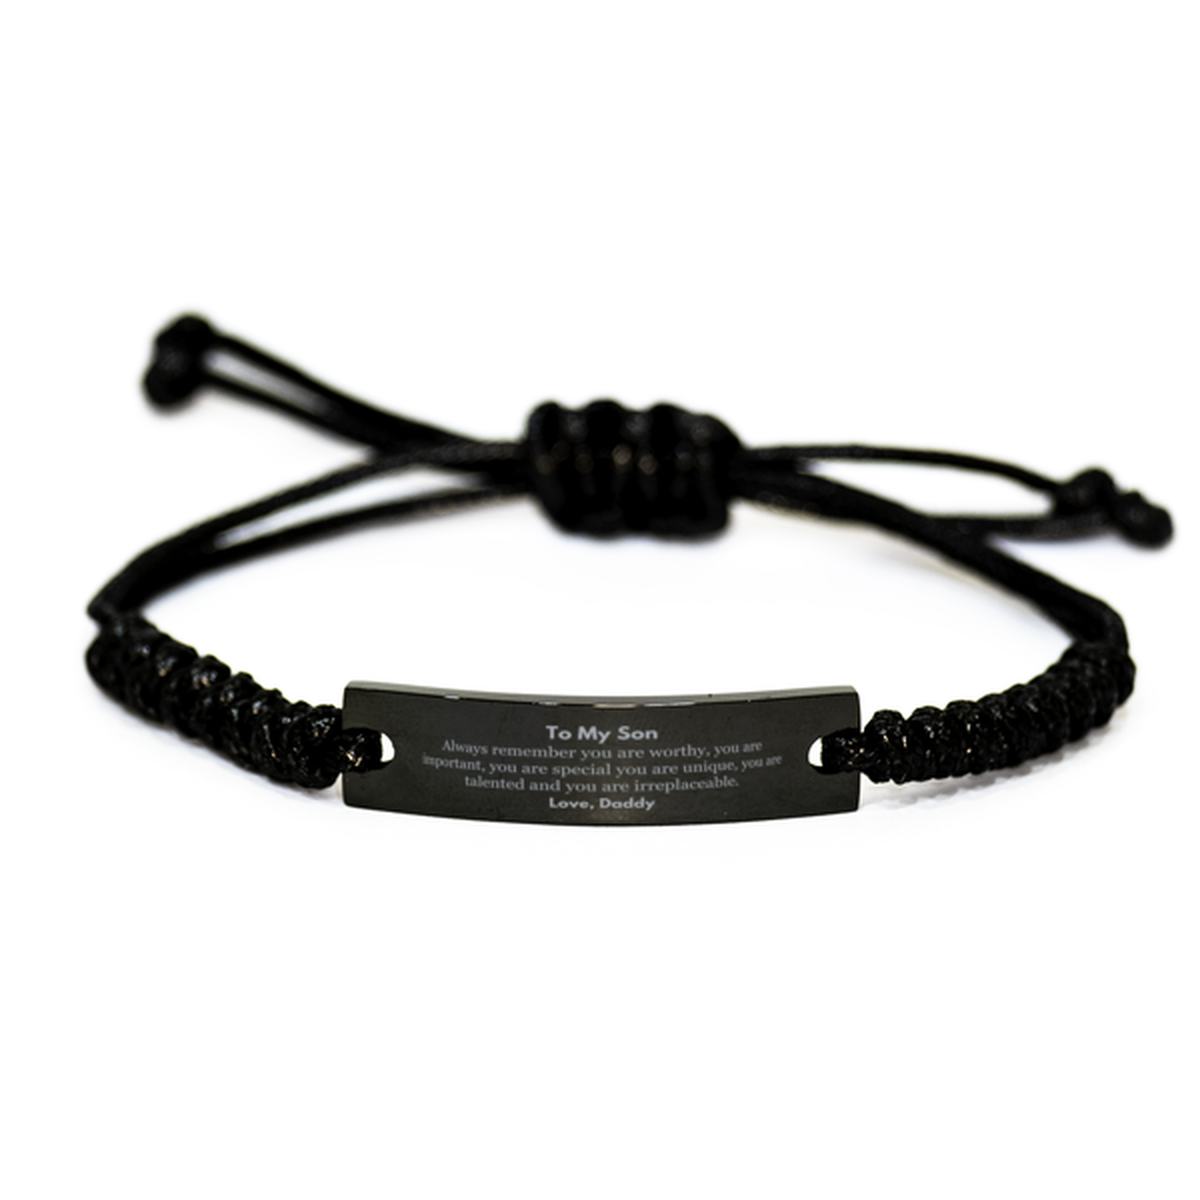 Son Birthday Gifts from Daddy, Inspirational Black Rope Bracelet for Son Christmas Graduation Gifts for Son Always remember you are worthy, you are important. Love, Daddy